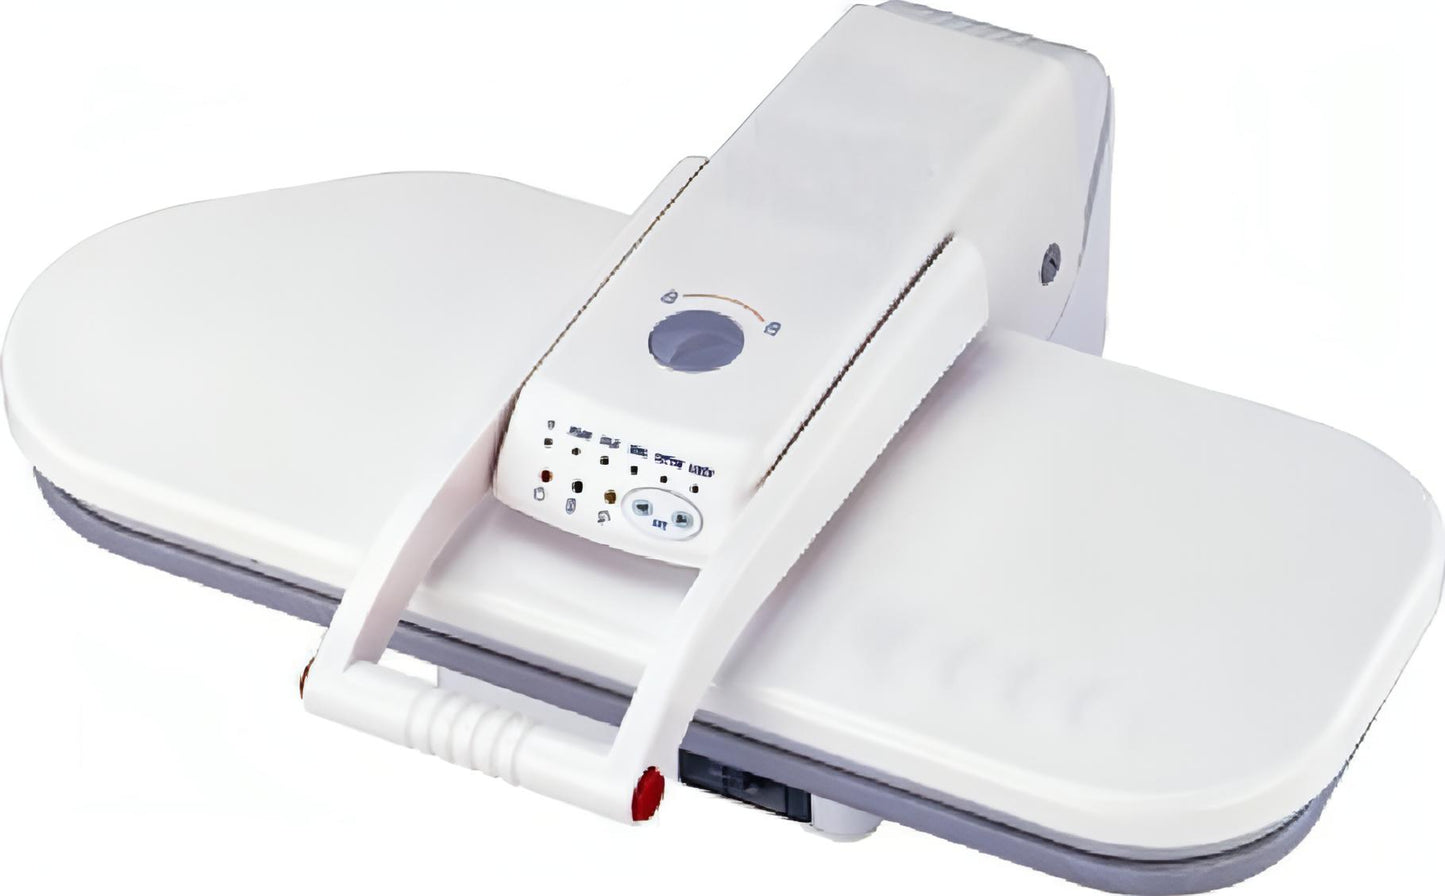 Mega 64cm Ironing Press - Steam and Dry Press (white) - Singer Outlet Offer - March Delivery